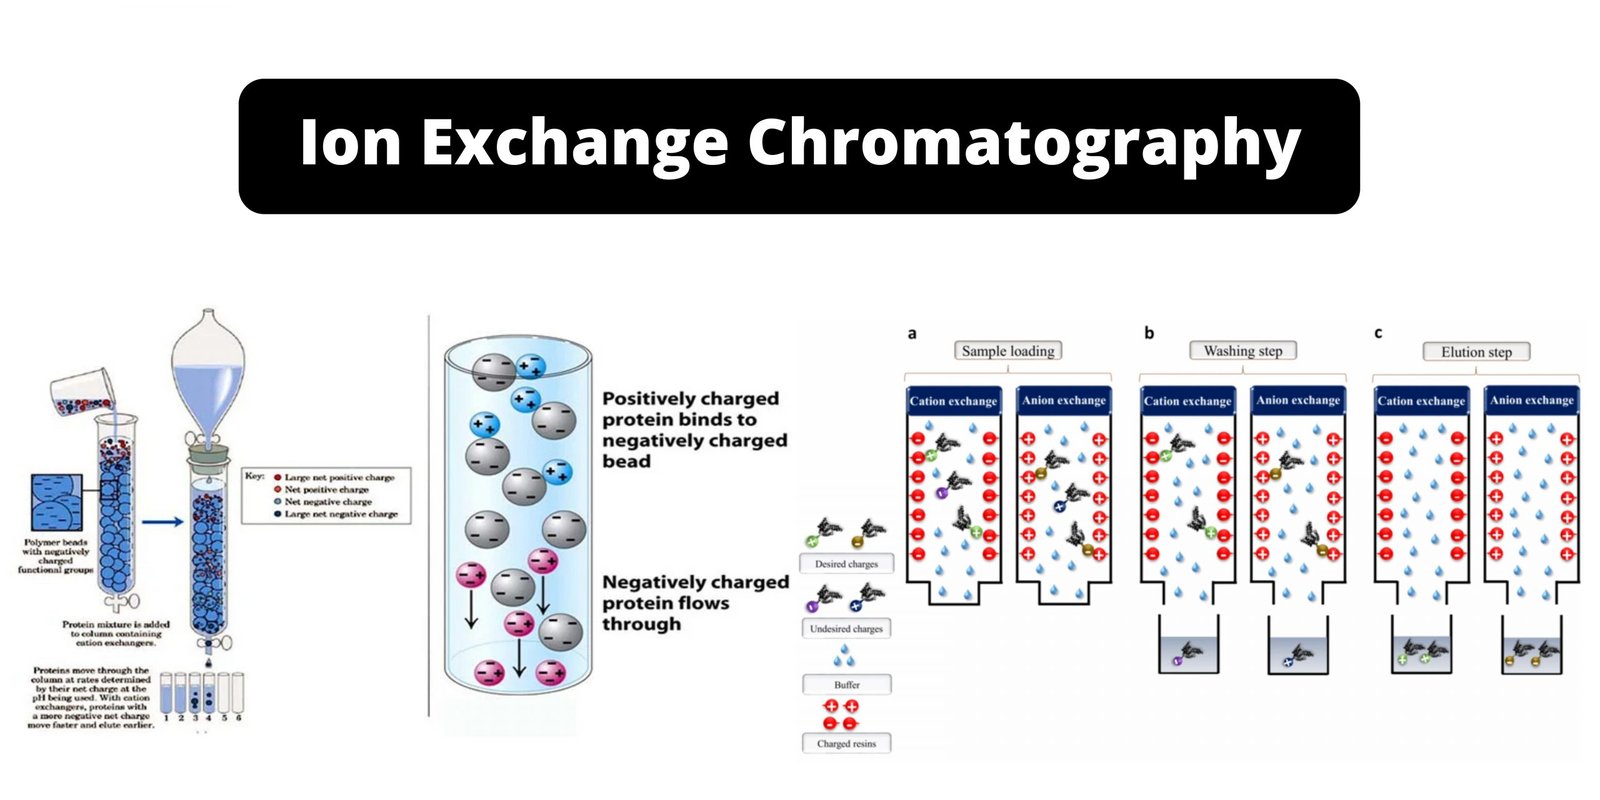 Ion Exchange Chromatography – Definition, Principle, Protocol, Applications, Examples